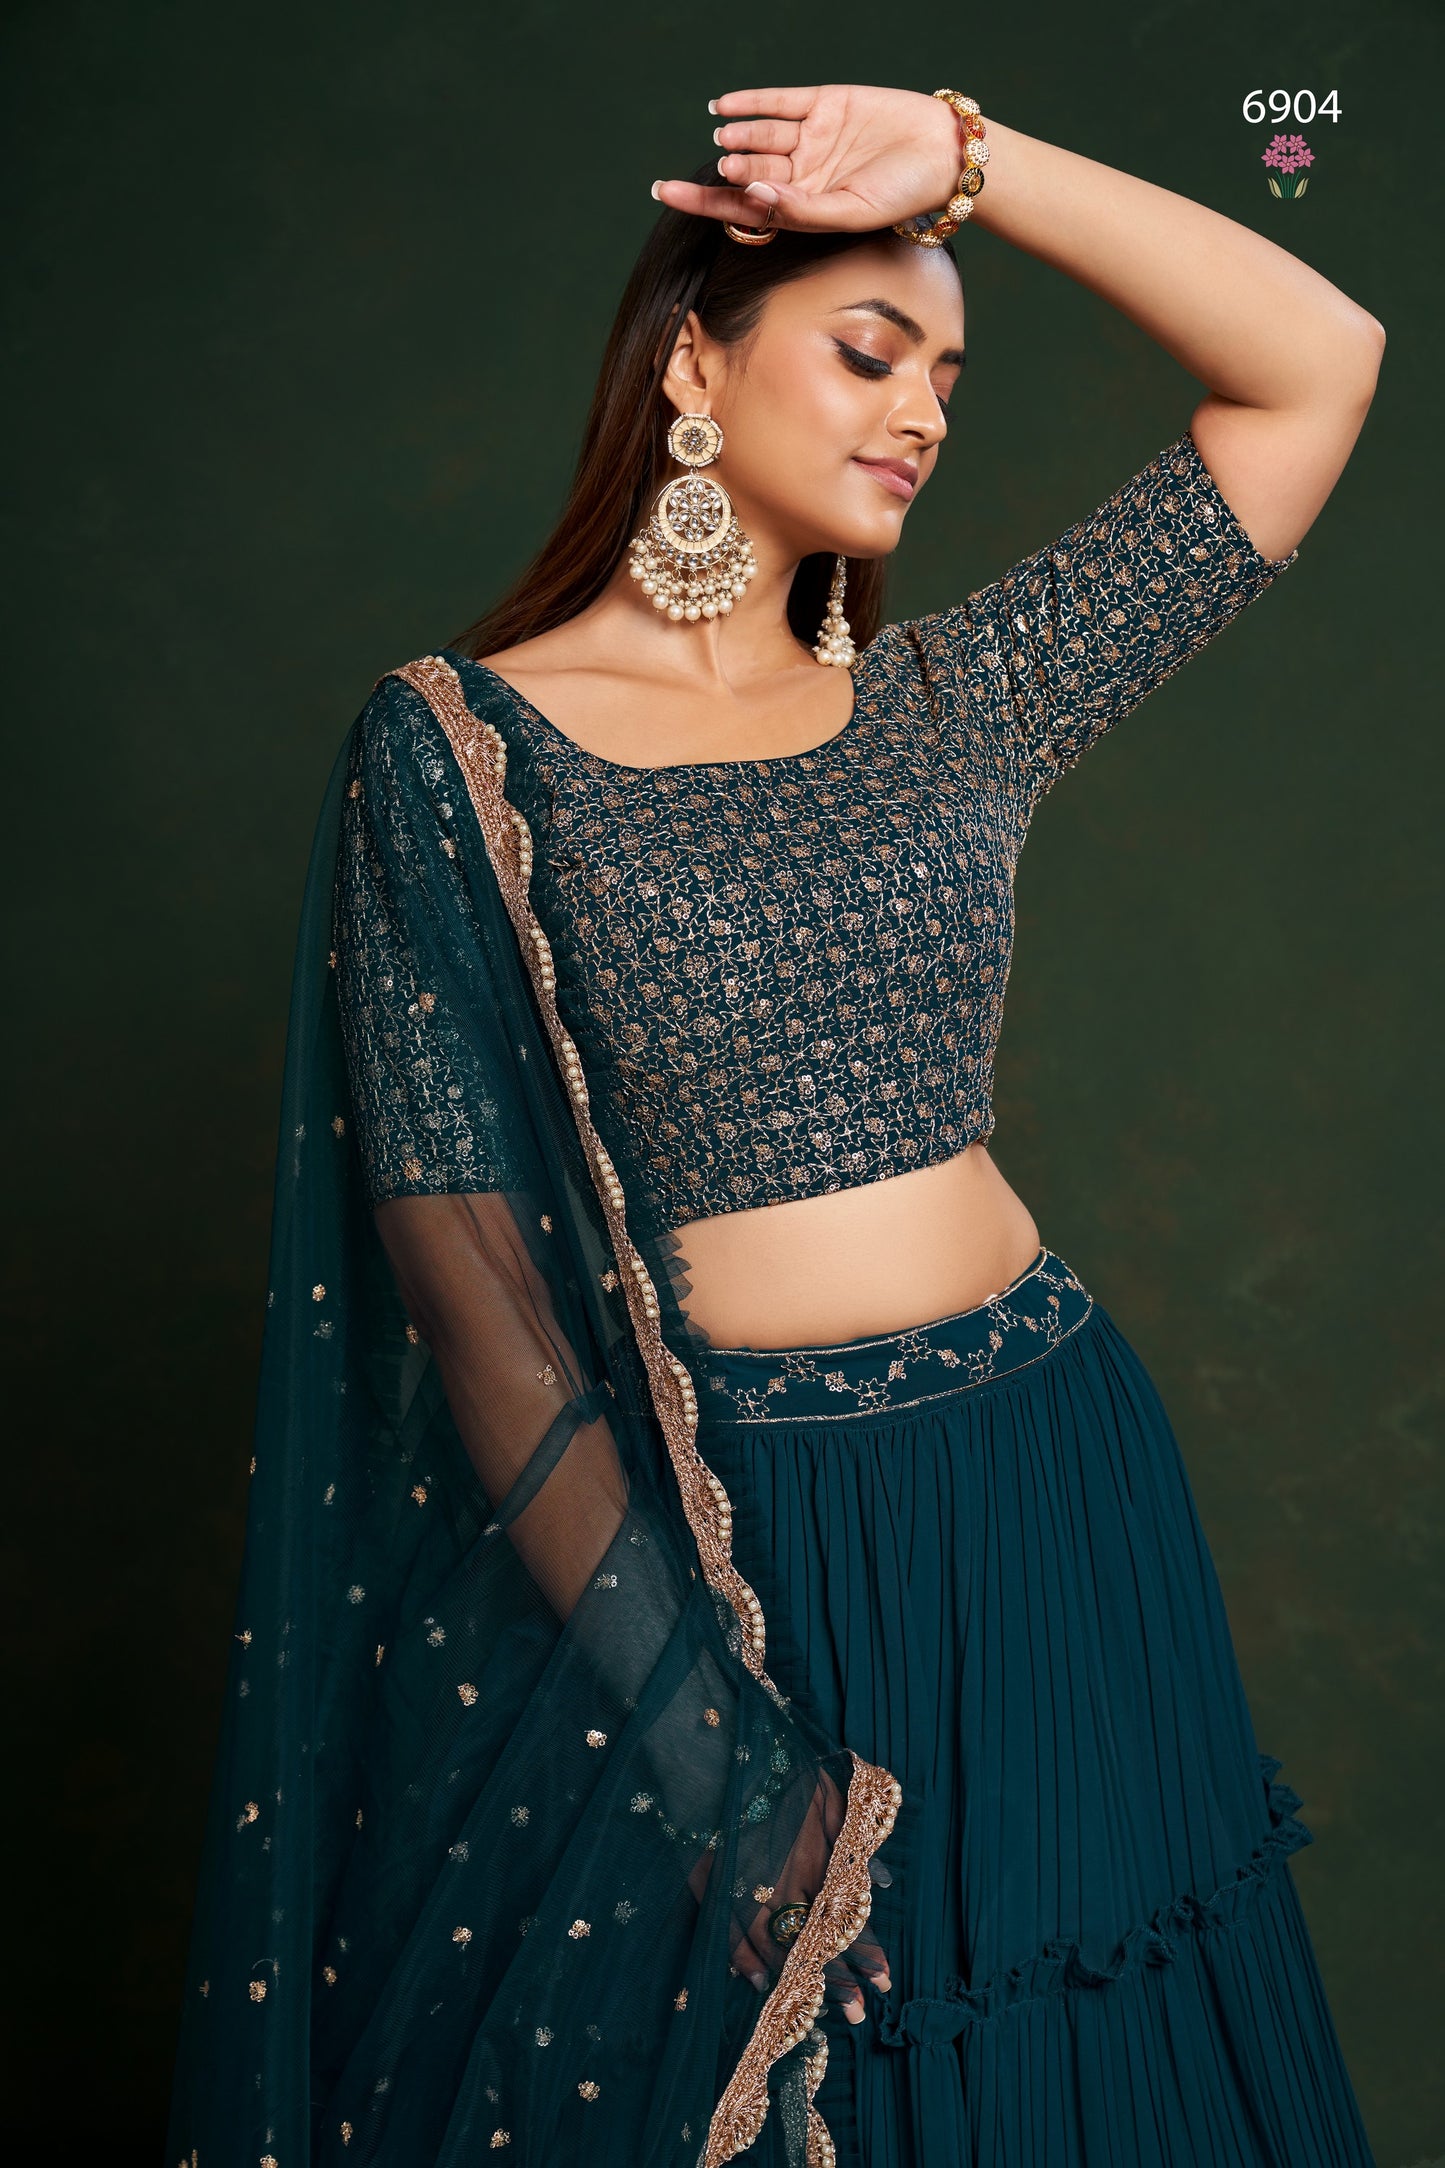 Teal Georgette Ruffle Lehenga Choli 18 Meter Flair For Indian Festivals & Weddings - Sequence Embroidery Work, Thread Embroidery Work